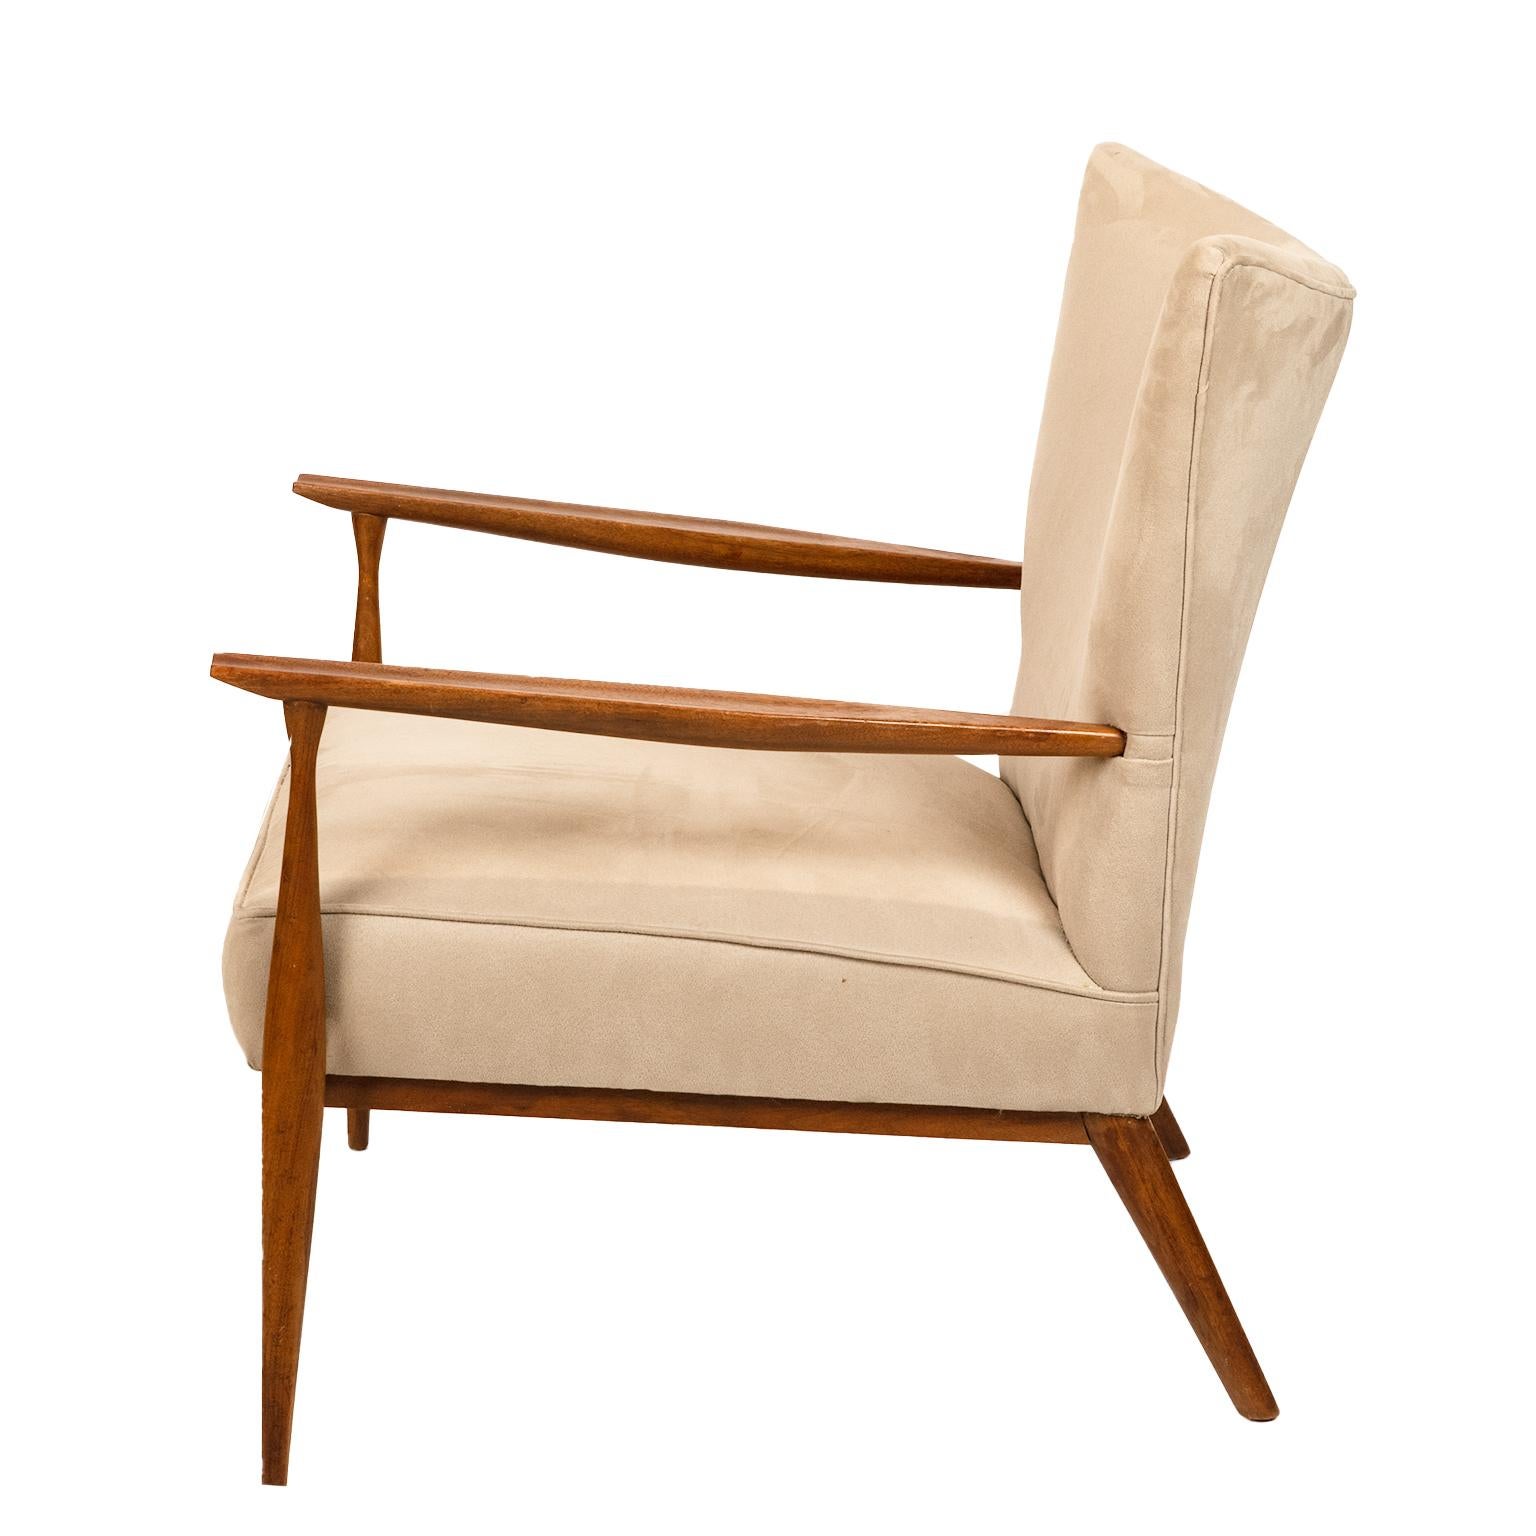 A very cool and comfortable classic mid century lounge chair with generous curved back by American design icon Paul McCobb….Exposed wood arms and legs. Upholstery is in very good as found condition from a smoke free home.
Very Mad Men!